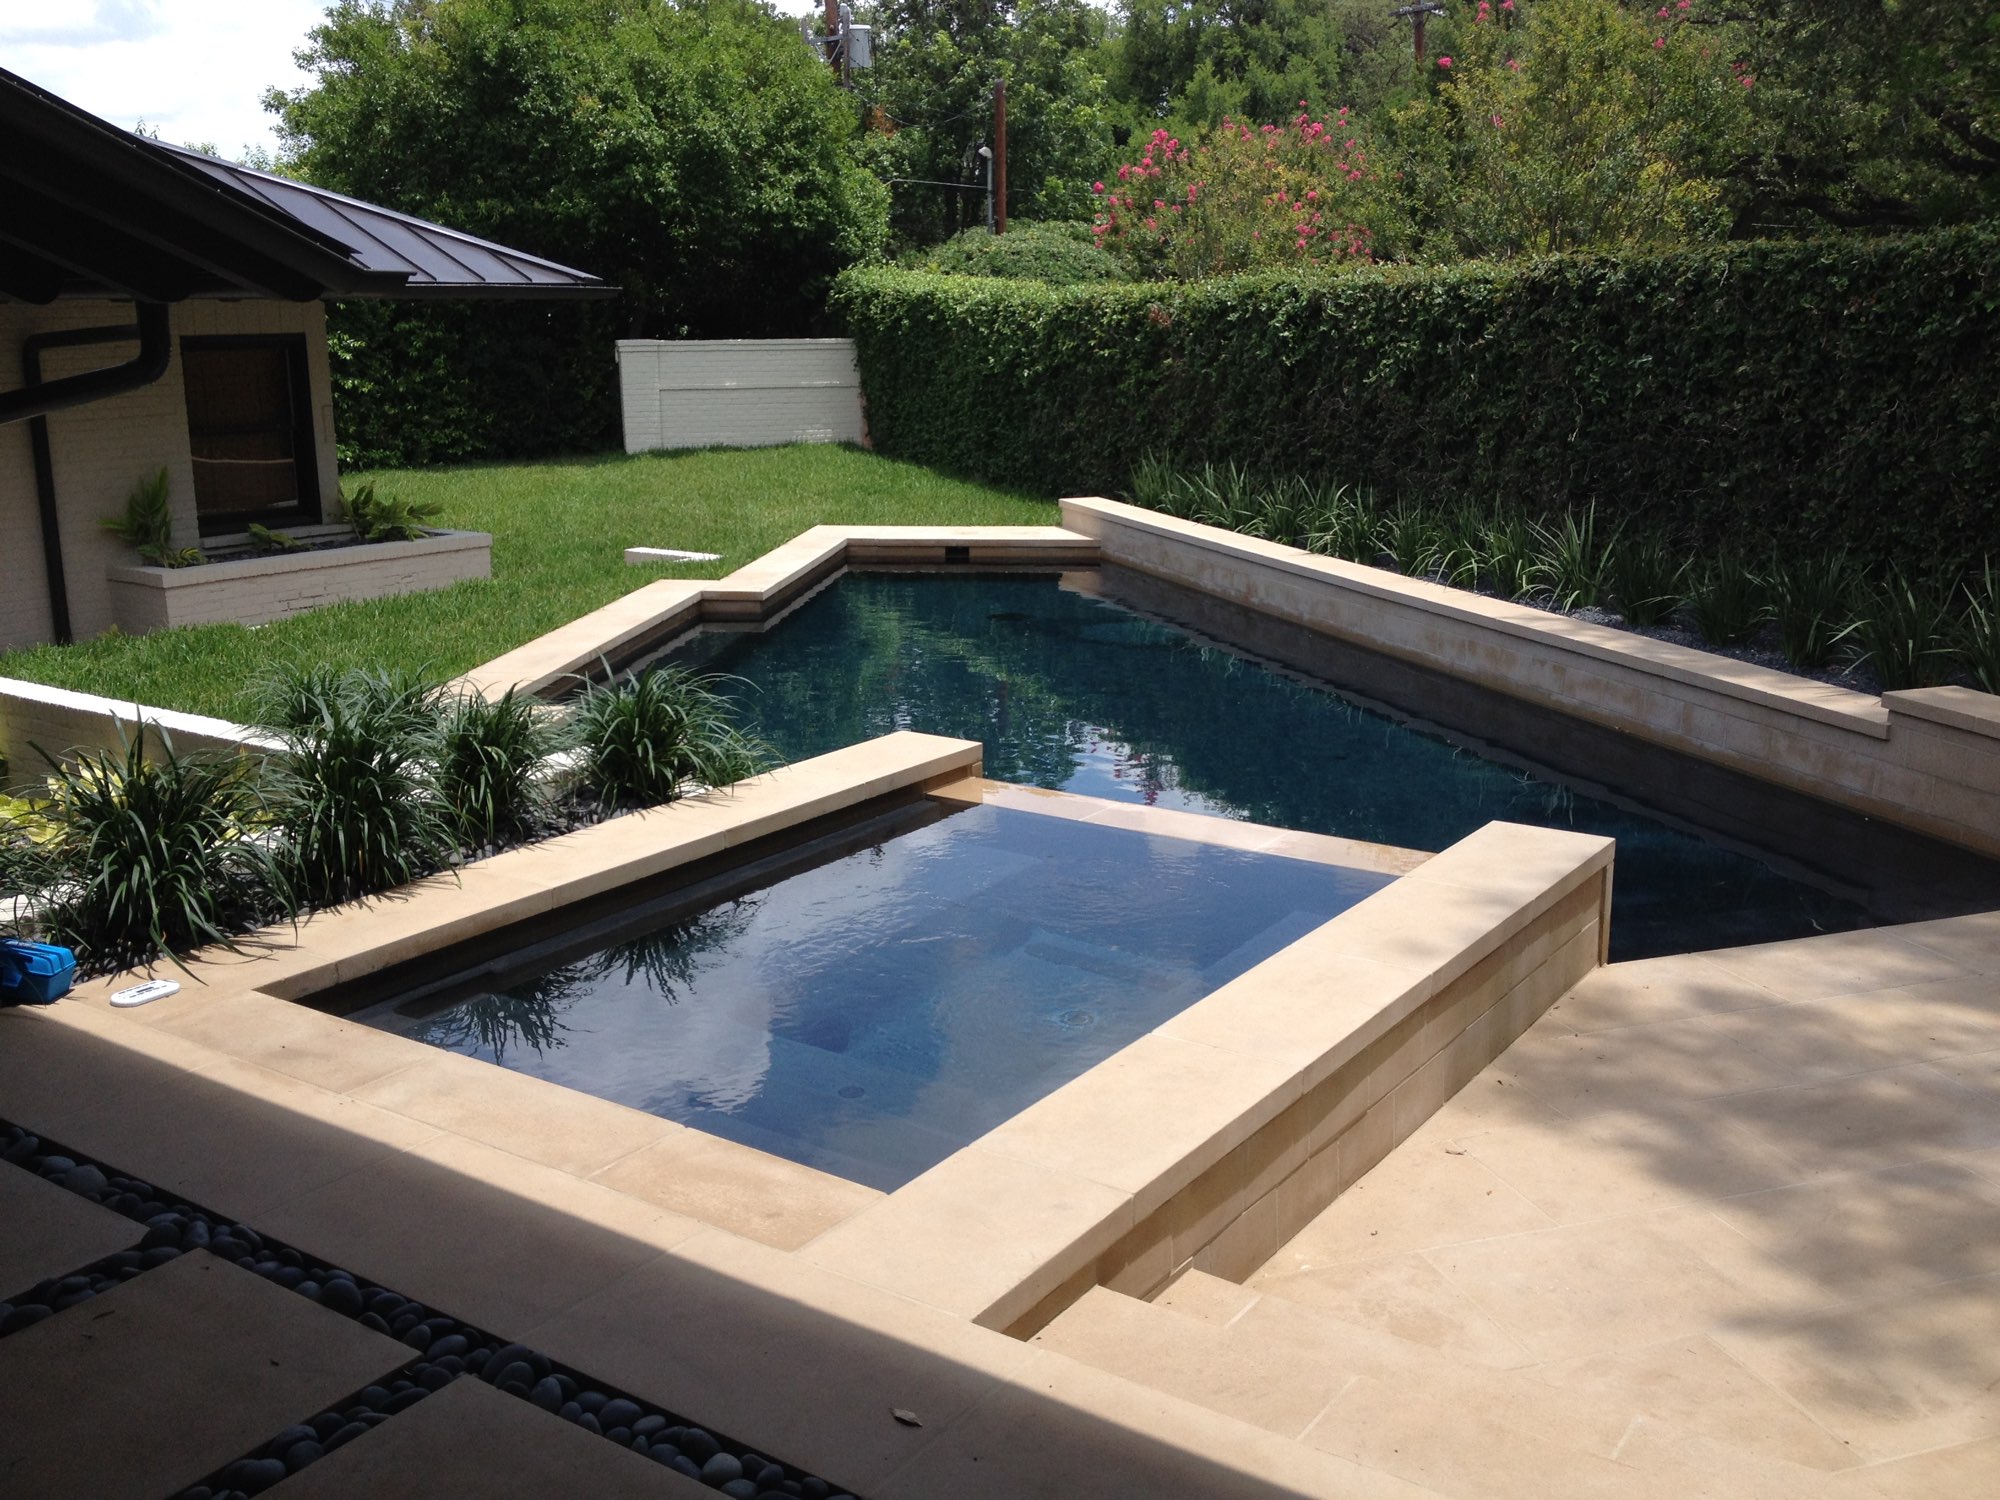 Architectural Pool and Spa